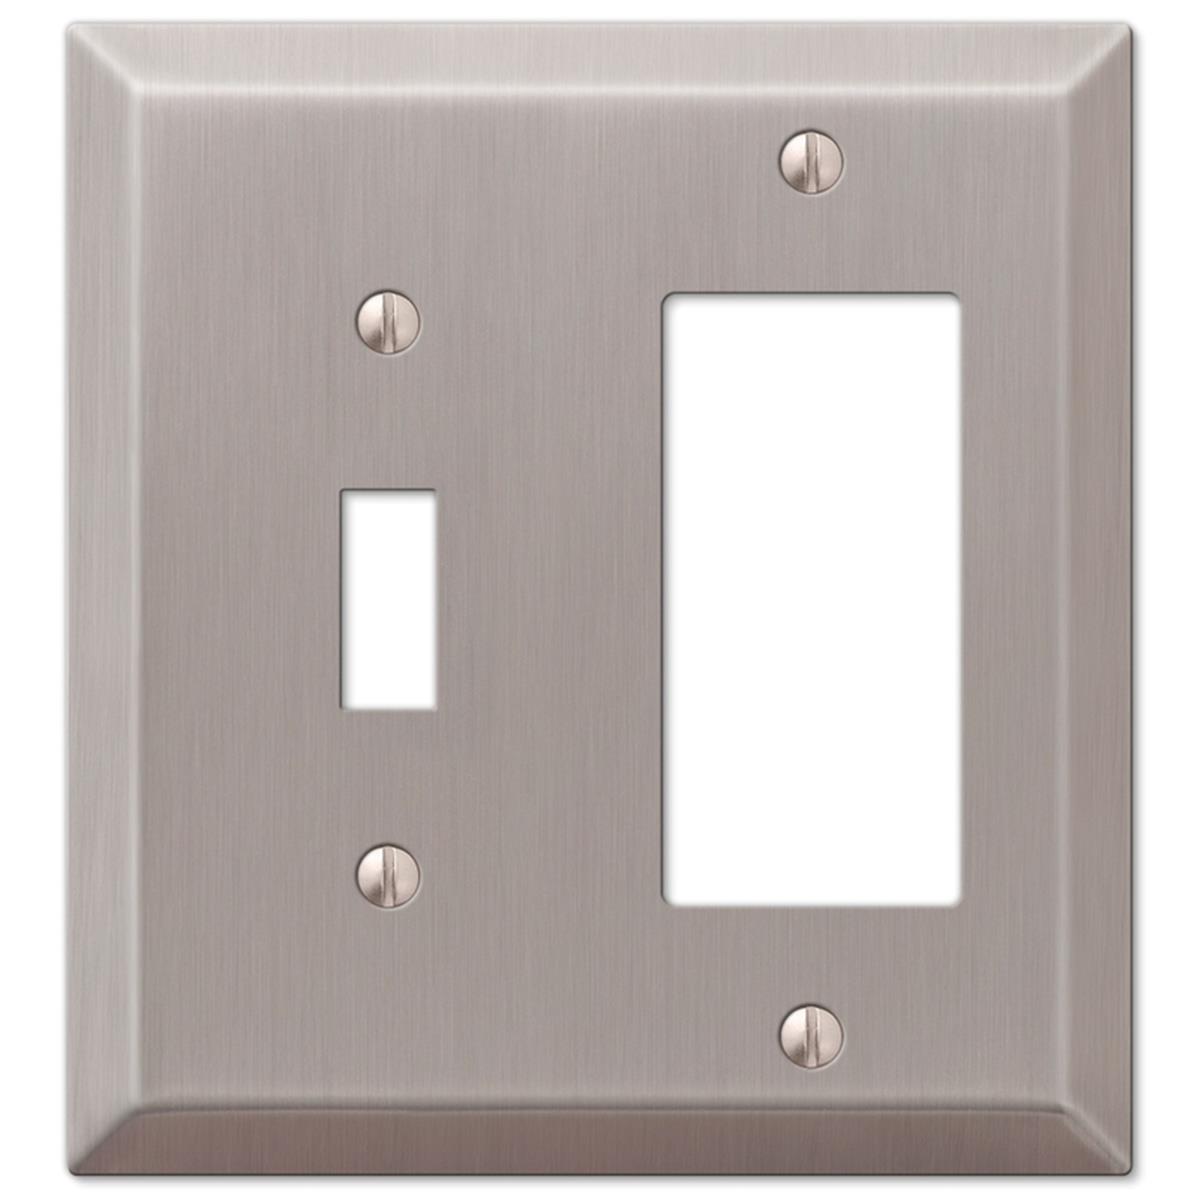 Picture of Amertac Holdings 3501426 1 Toggle & 1 Rocker Brushed Nickel Wallplate